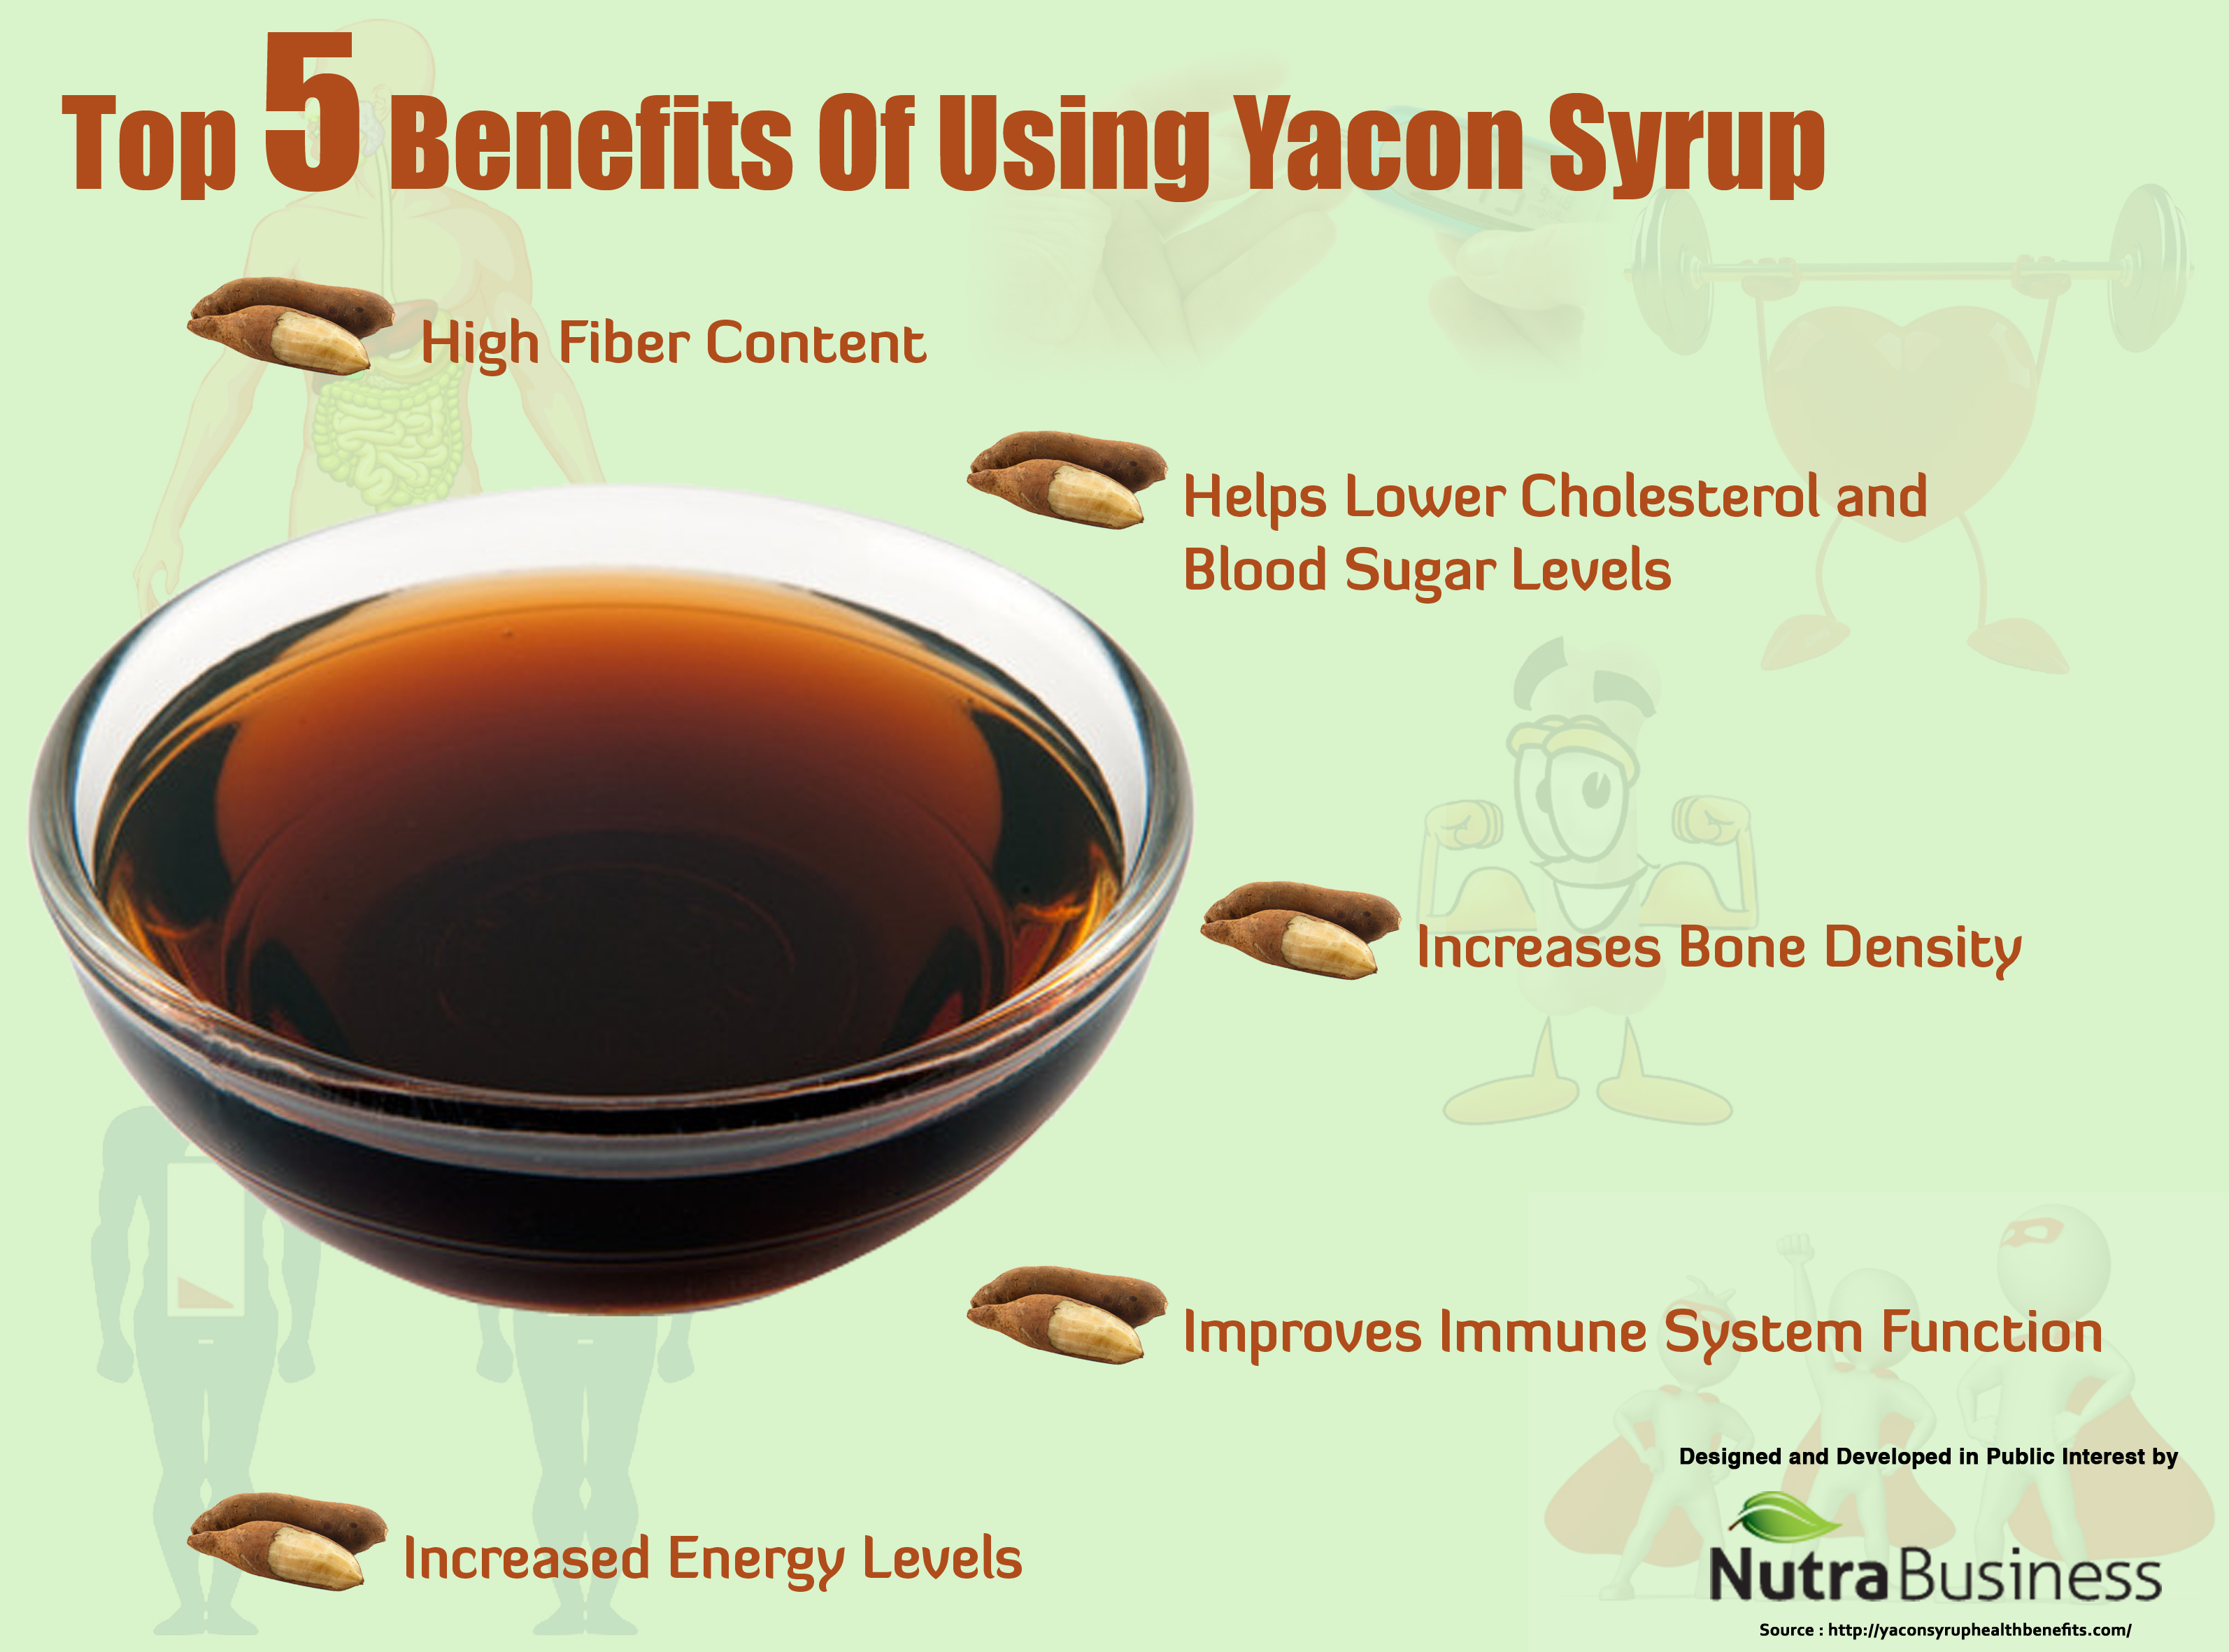 Is Yacon Syrup Healthy?